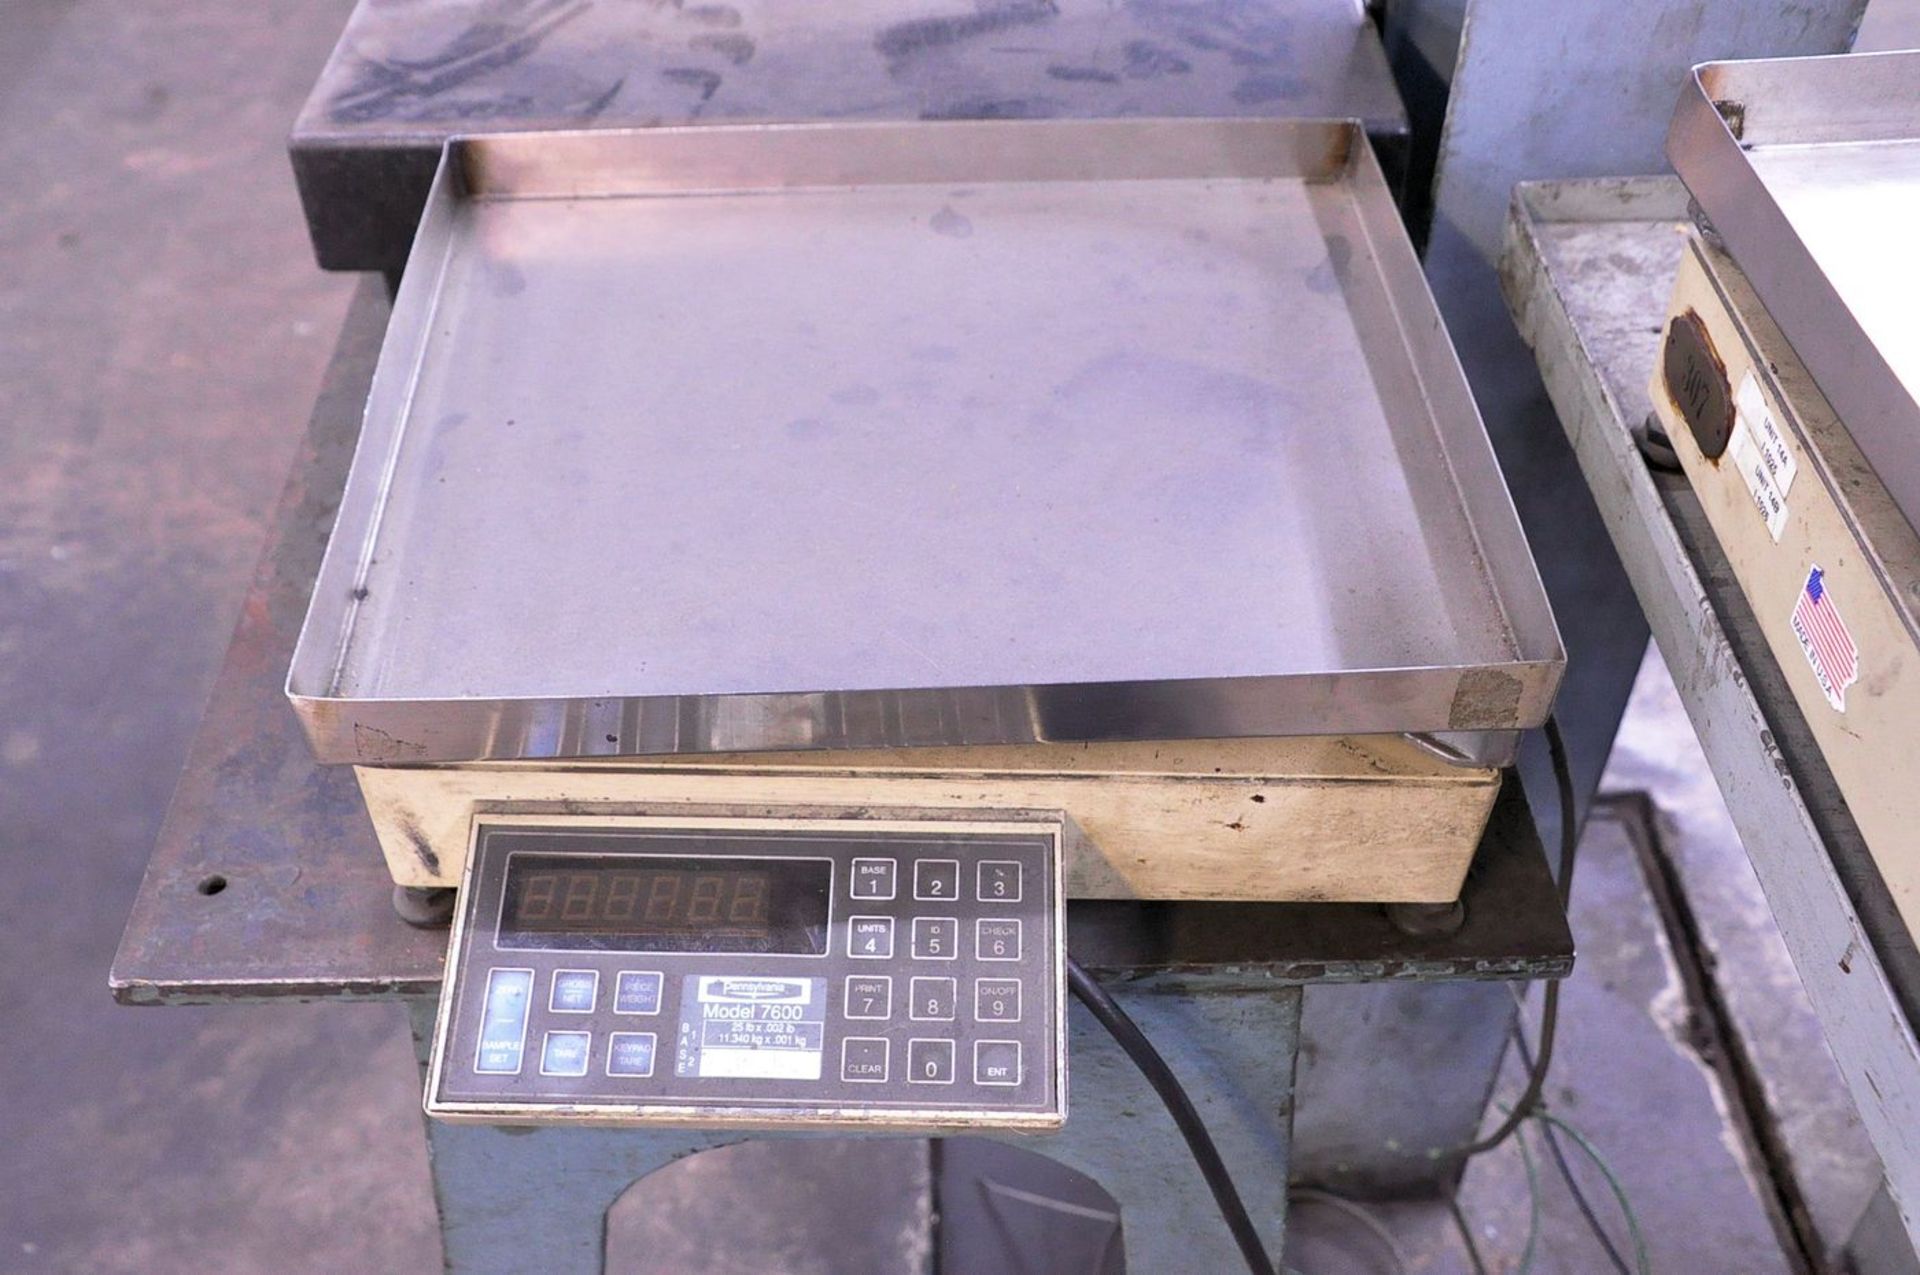 Pennsylvania 18 in. x 24 in. (approx.) Digital Bench-Top Platform Scale; with Aux. Dig. Scale with - Image 3 of 3